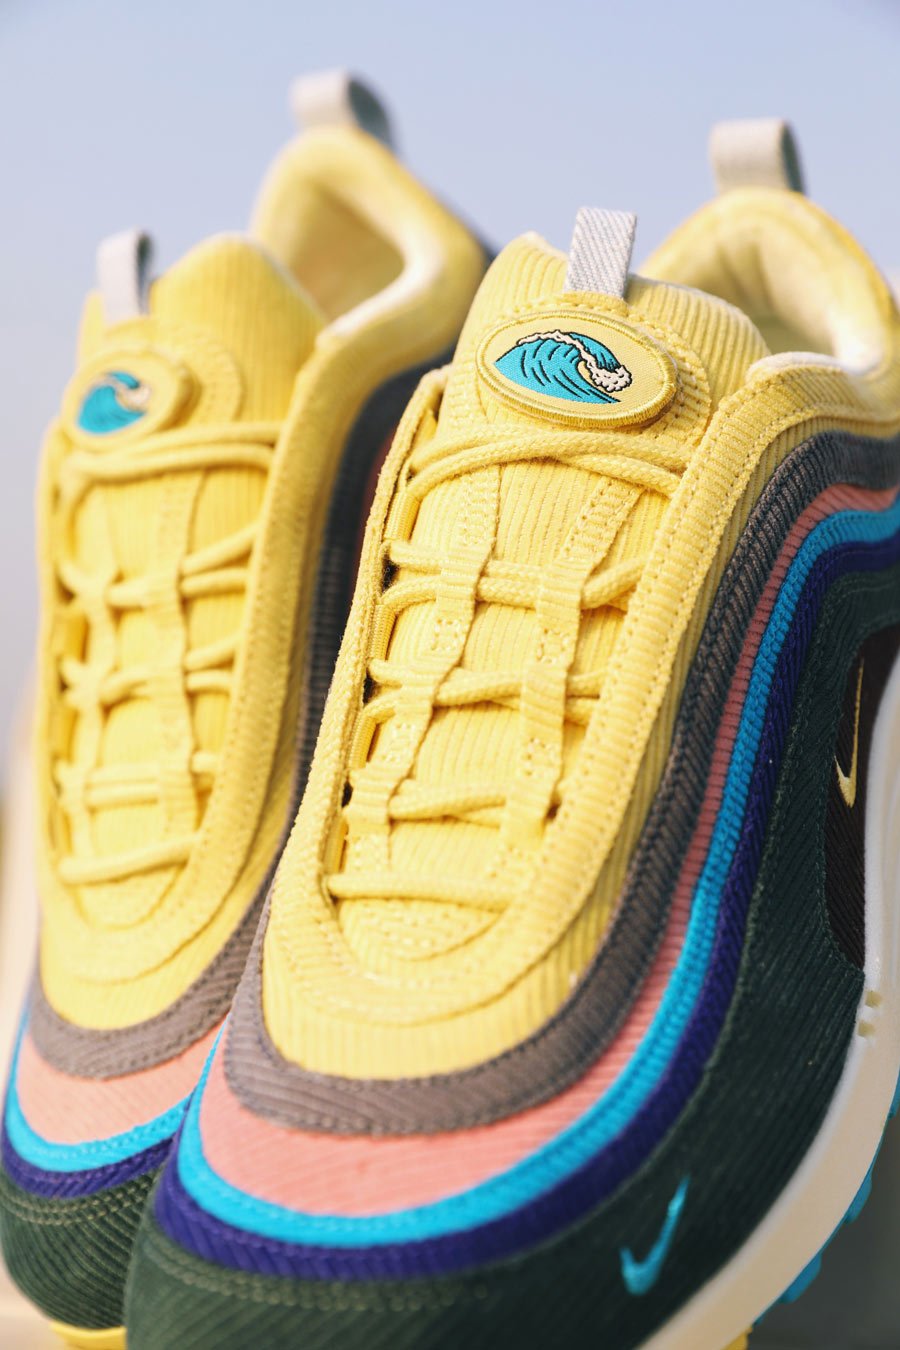 Nike Air Max 1-97 F Sean Wotherspoon